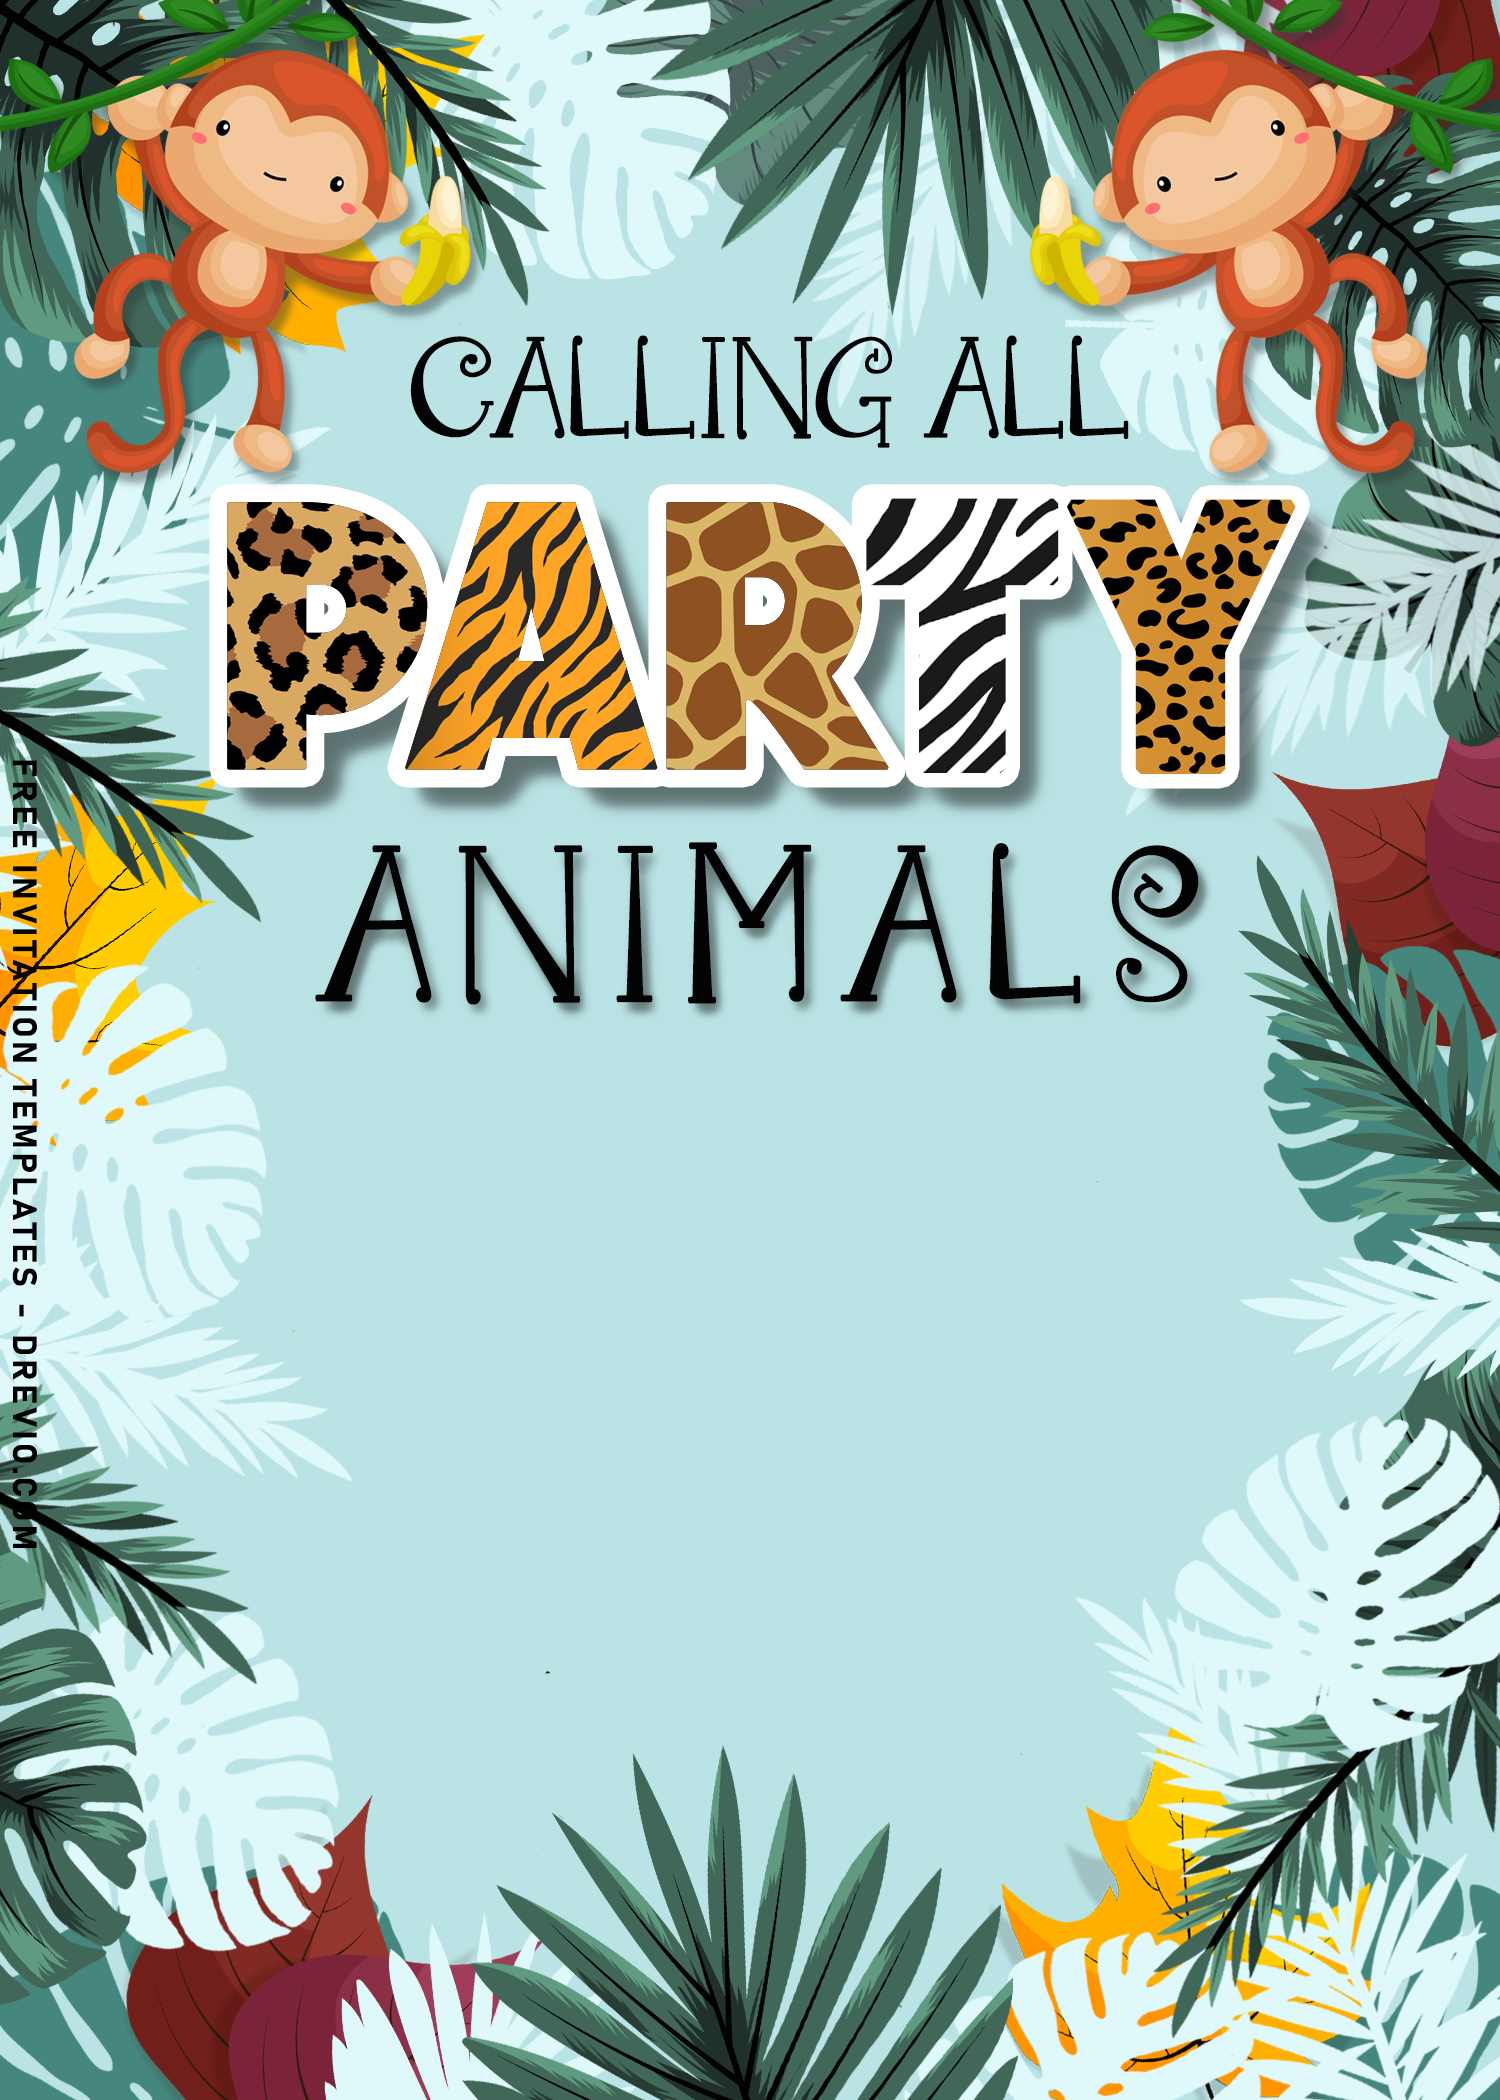 10-best-party-animals-invitation-templates-for-kids-birthday-party